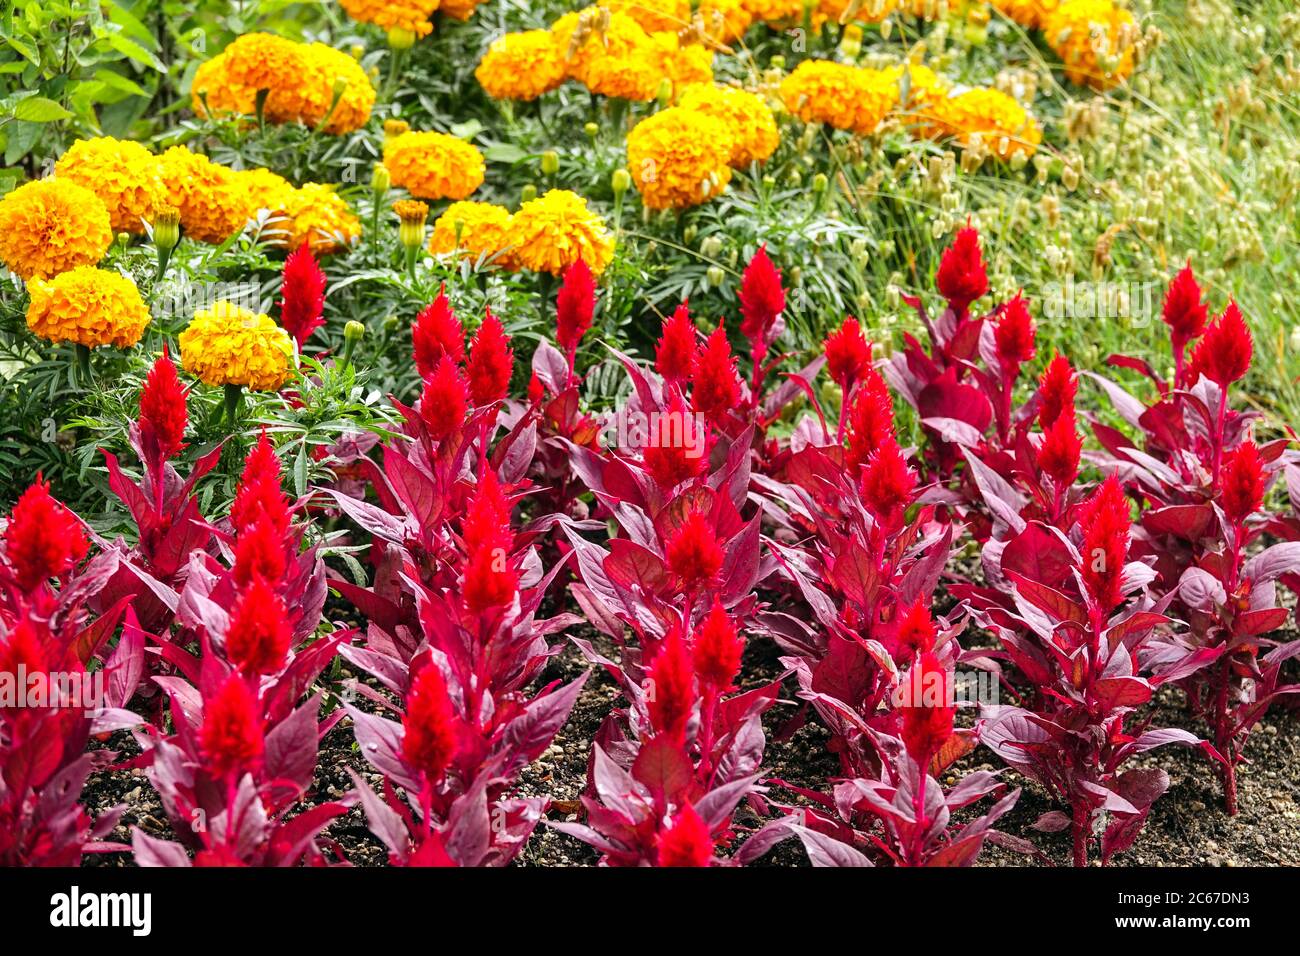 Red Celosia 'Smart Look Red' Tagetes flower bed, summer bedding plants garden border, colourful flowers, yellow marigolds Stock Photo